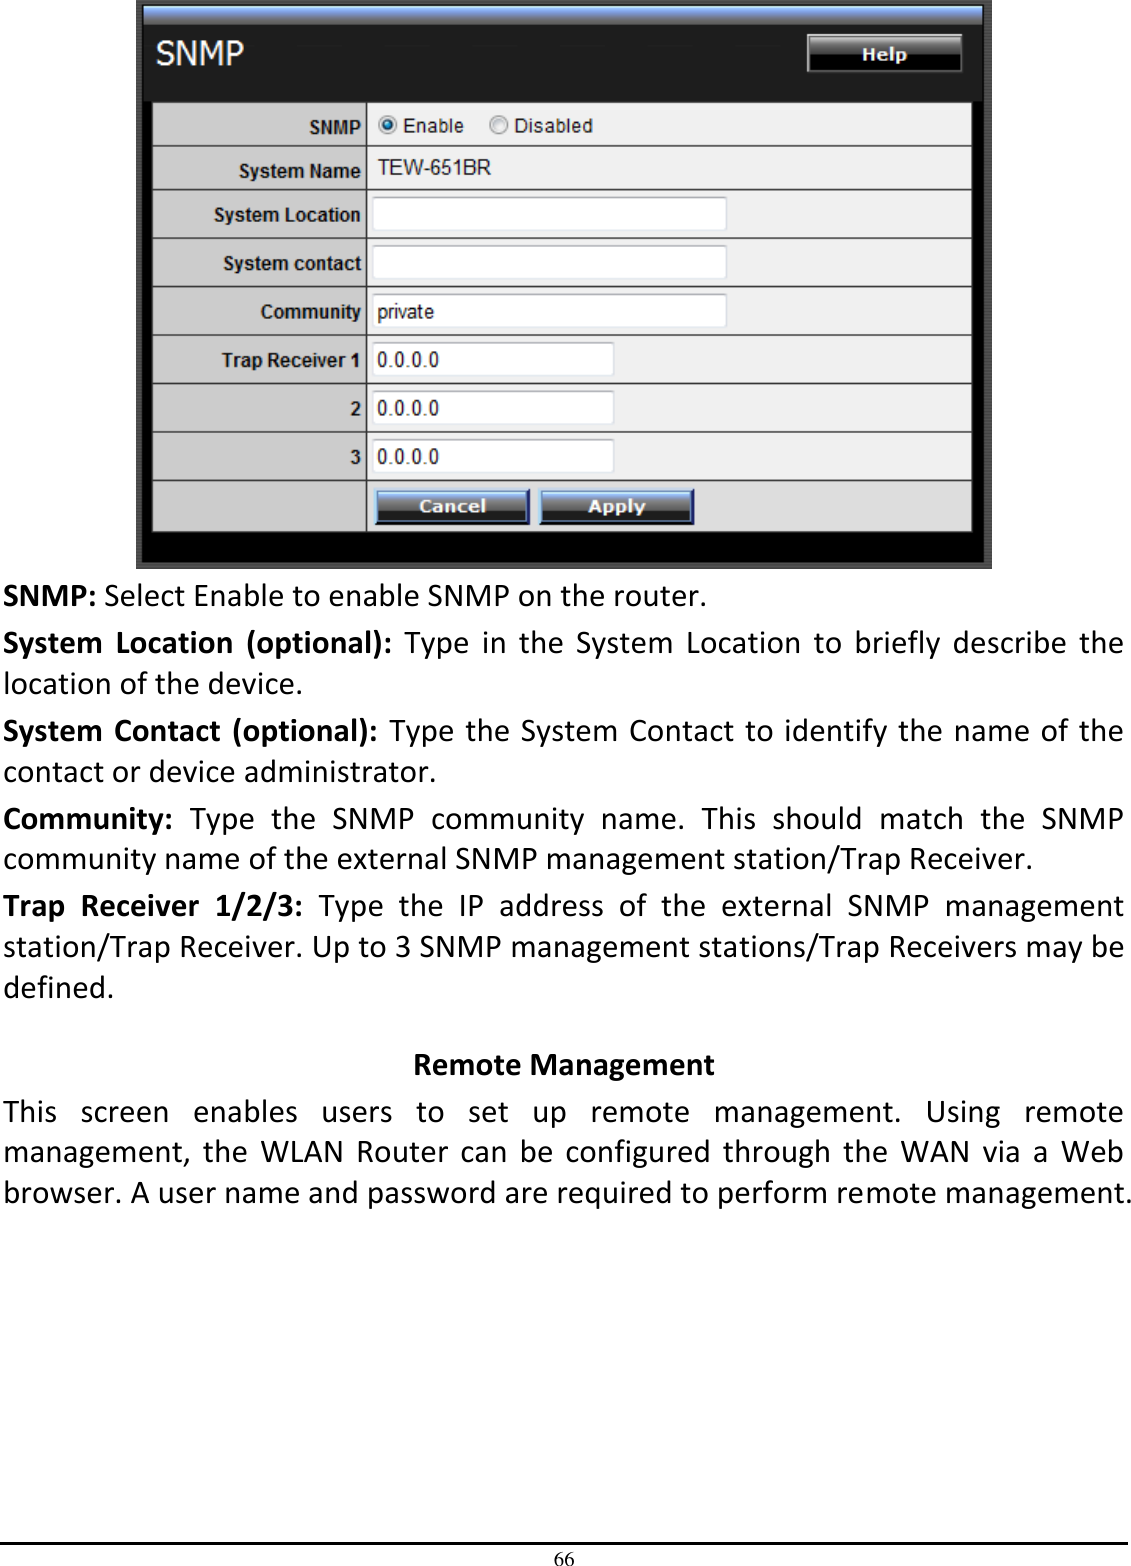 66  SNMP: Select Enable to enable SNMP on the router. System  Location  (optional):  Type  in  the  System  Location  to  briefly  describe  the location of the device.  System Contact (optional):  Type the System Contact to identify the name of the contact or device administrator. Community:  Type  the  SNMP  community  name.  This  should  match  the  SNMP community name of the external SNMP management station/Trap Receiver. Trap  Receiver  1/2/3:  Type  the  IP  address  of  the  external  SNMP  management station/Trap Receiver. Up to 3 SNMP management stations/Trap Receivers may be defined.  Remote Management This  screen  enables  users  to  set  up  remote  management.  Using  remote management,  the  WLAN  Router  can  be  configured  through  the  WAN  via  a  Web browser. A user name and password are required to perform remote management. 